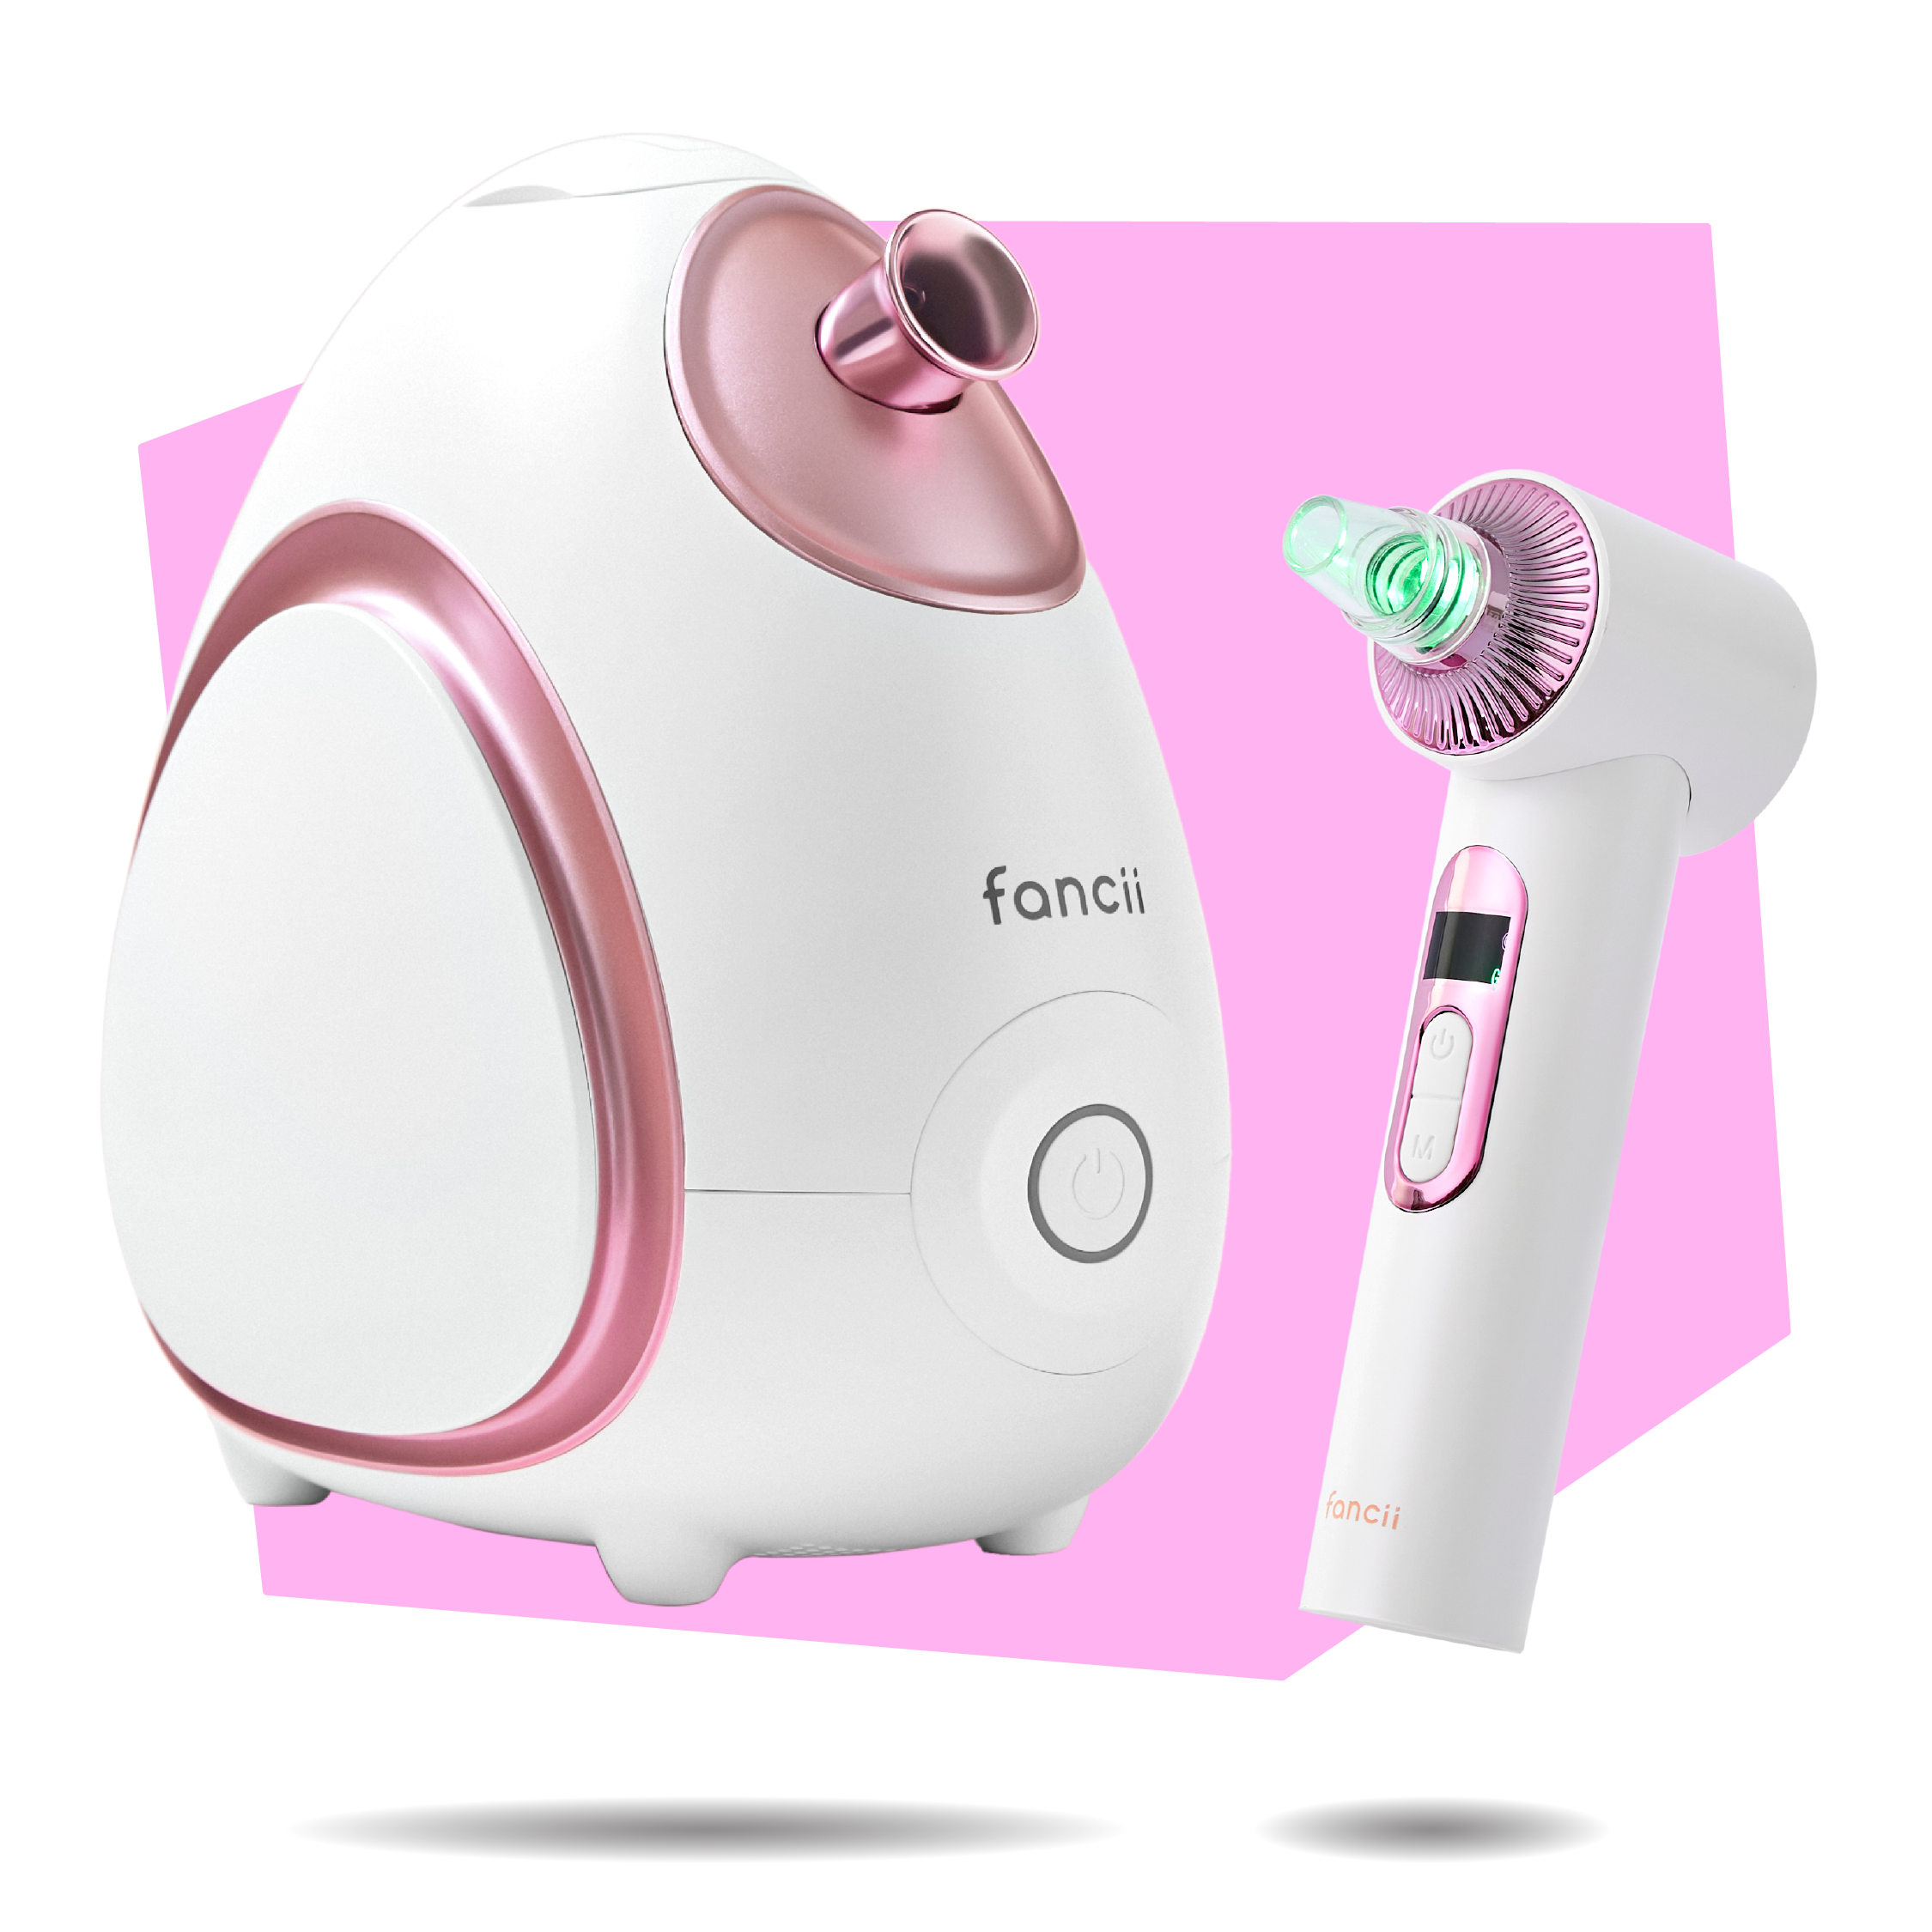 Pore-parazzi set with rivo facial steamer and clara at-home microdermabrasion machine